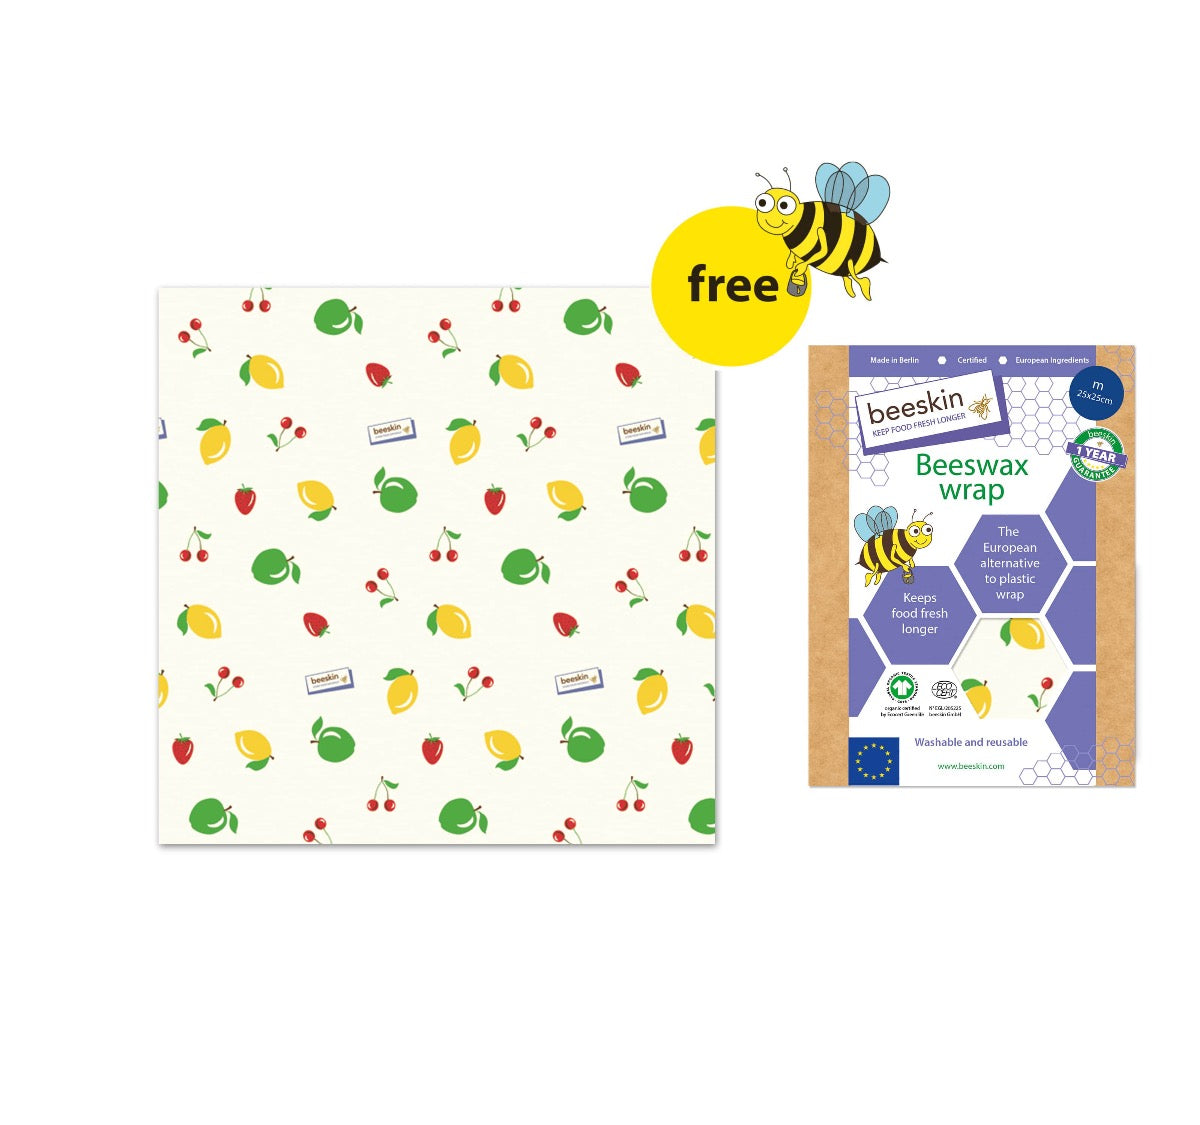 beeskin beeswax wrap fruit design and a big yellow button free with a funny bee next to packaging